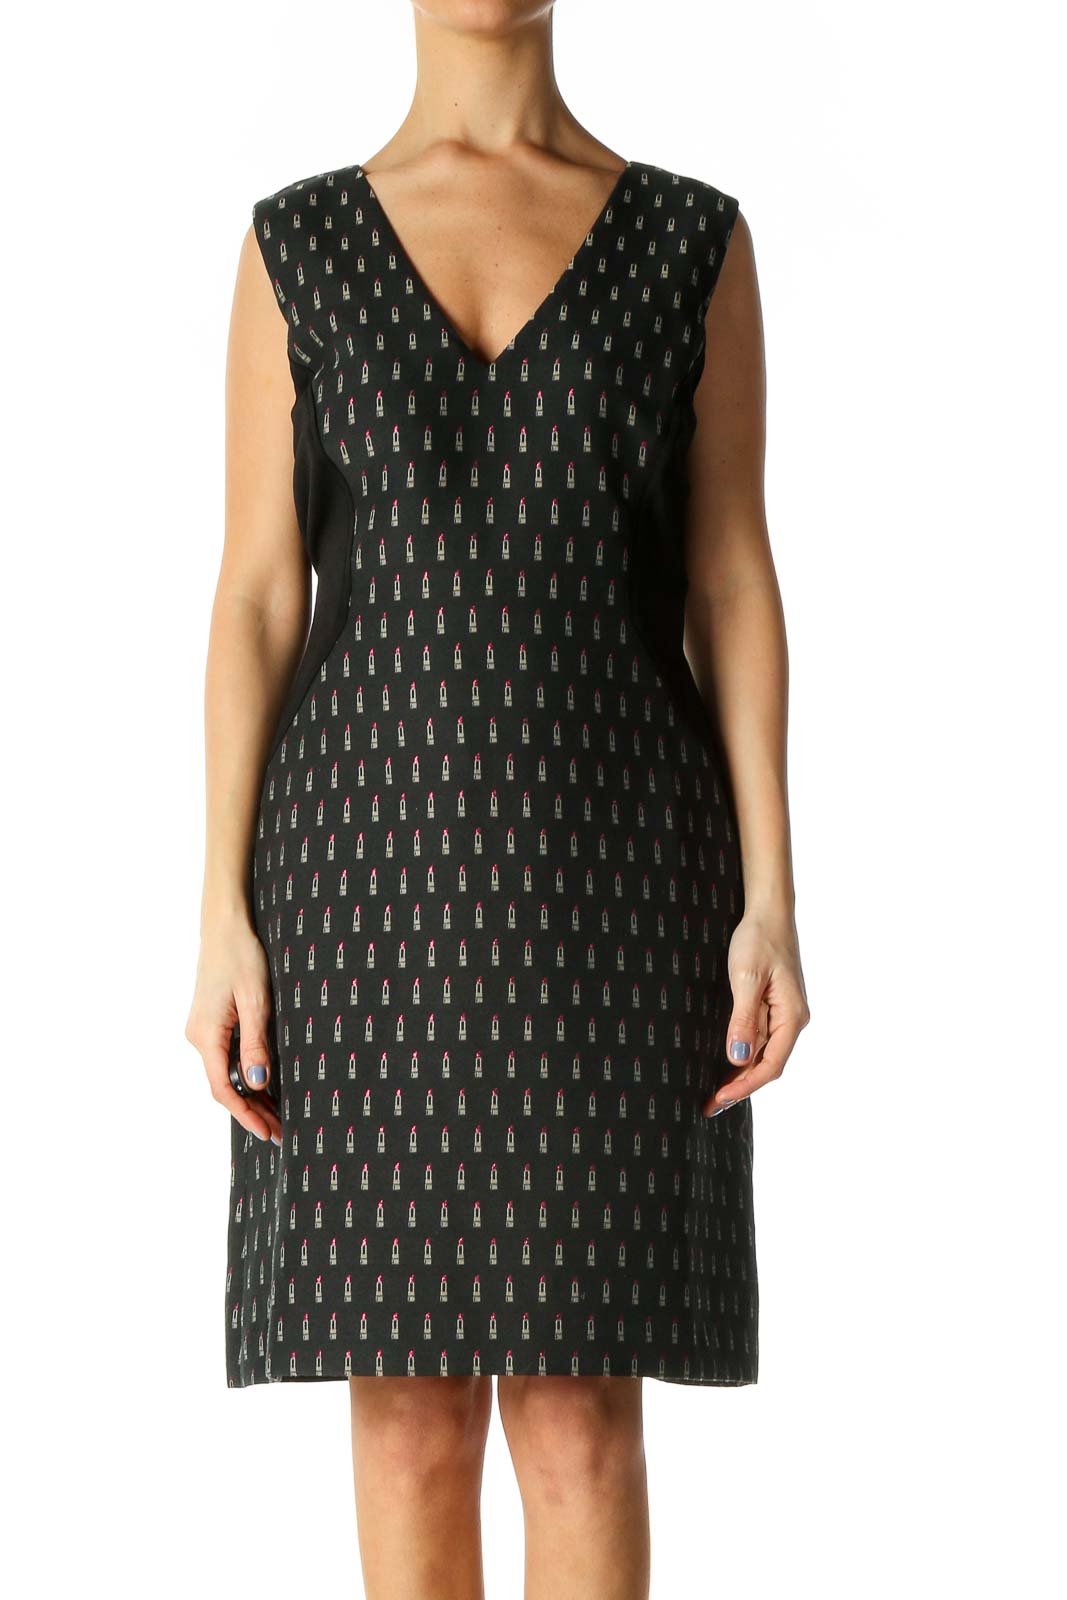 Black Casual A-Line Dress Front